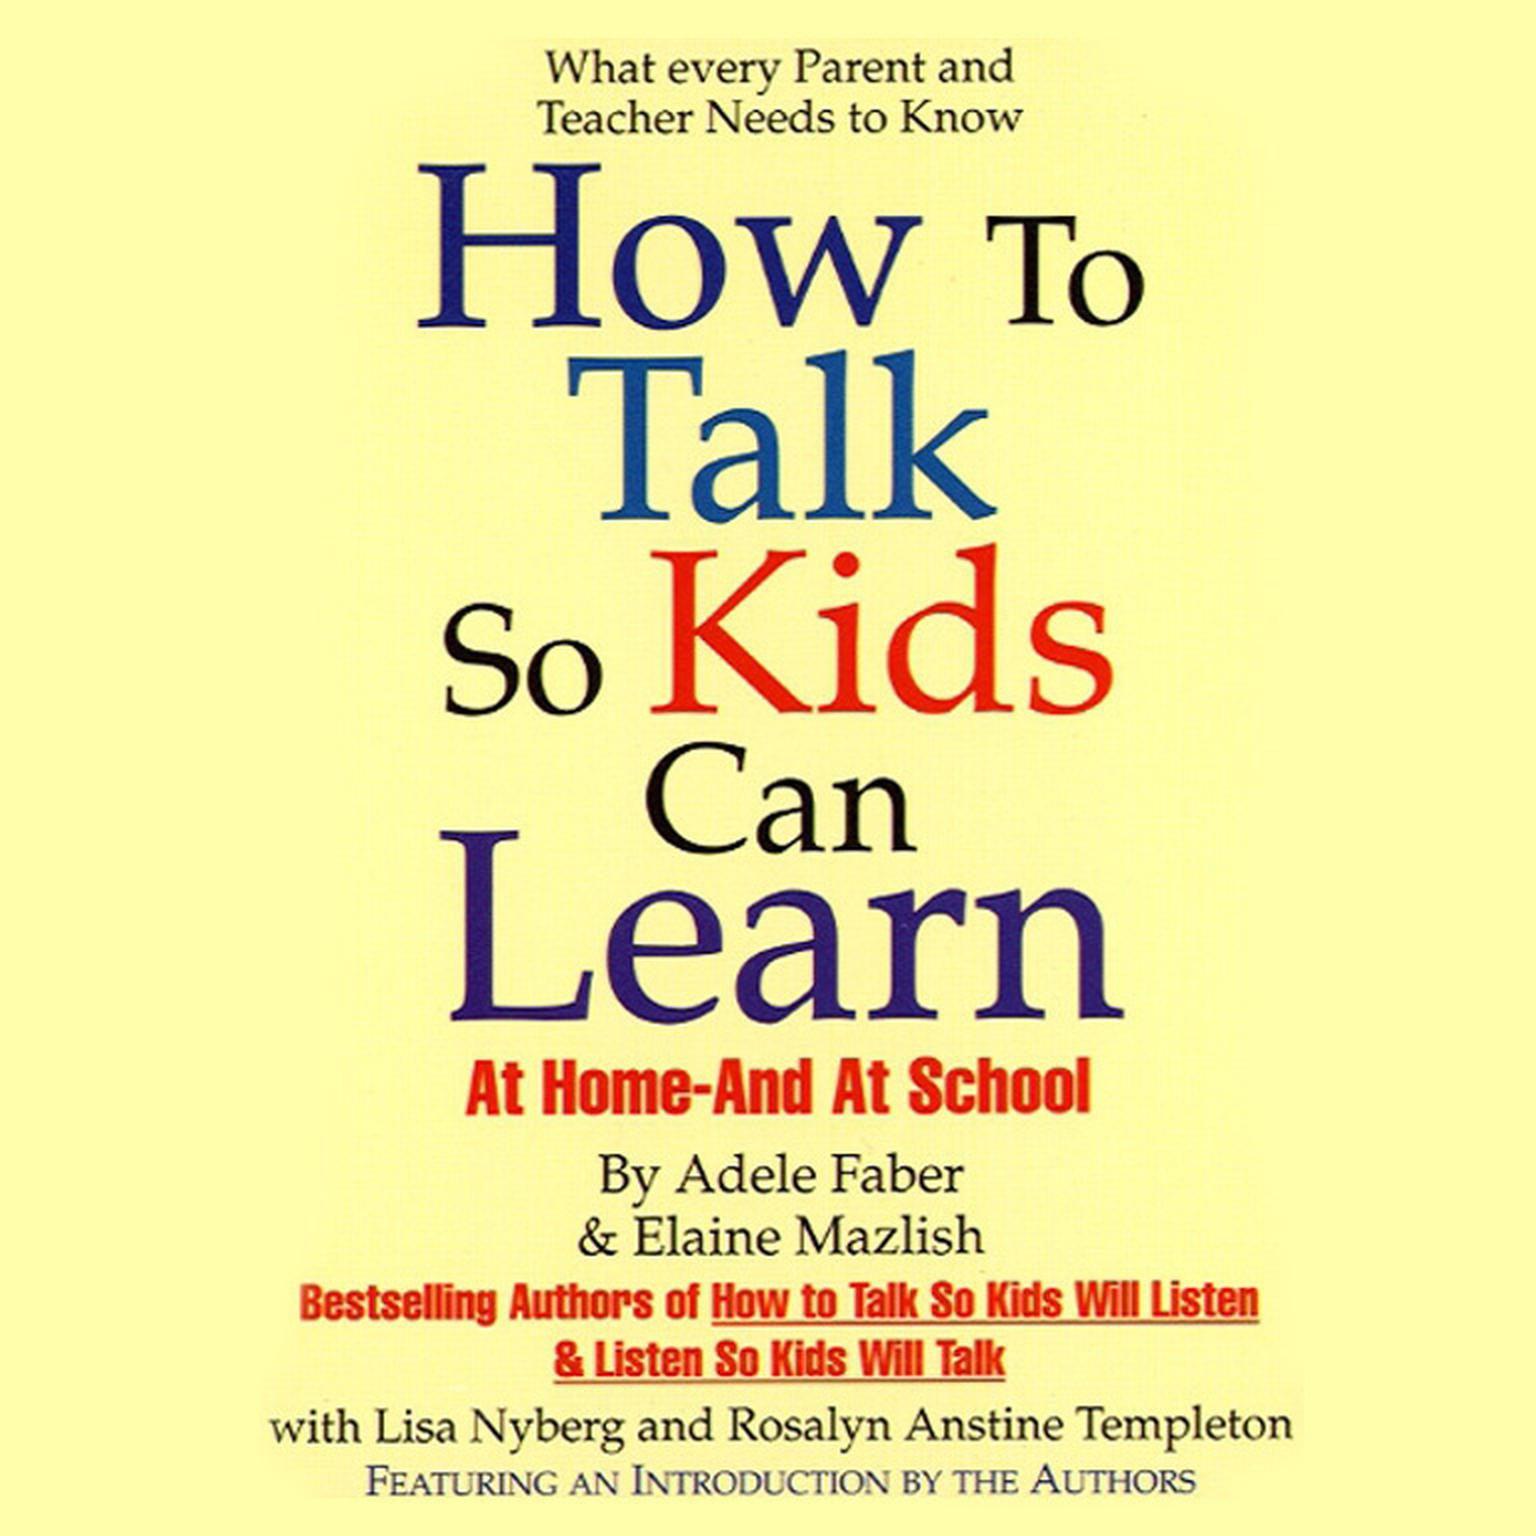 How to Talk So Kids Can Learn (Abridged): At Home and In School Audiobook, by Adele Faber